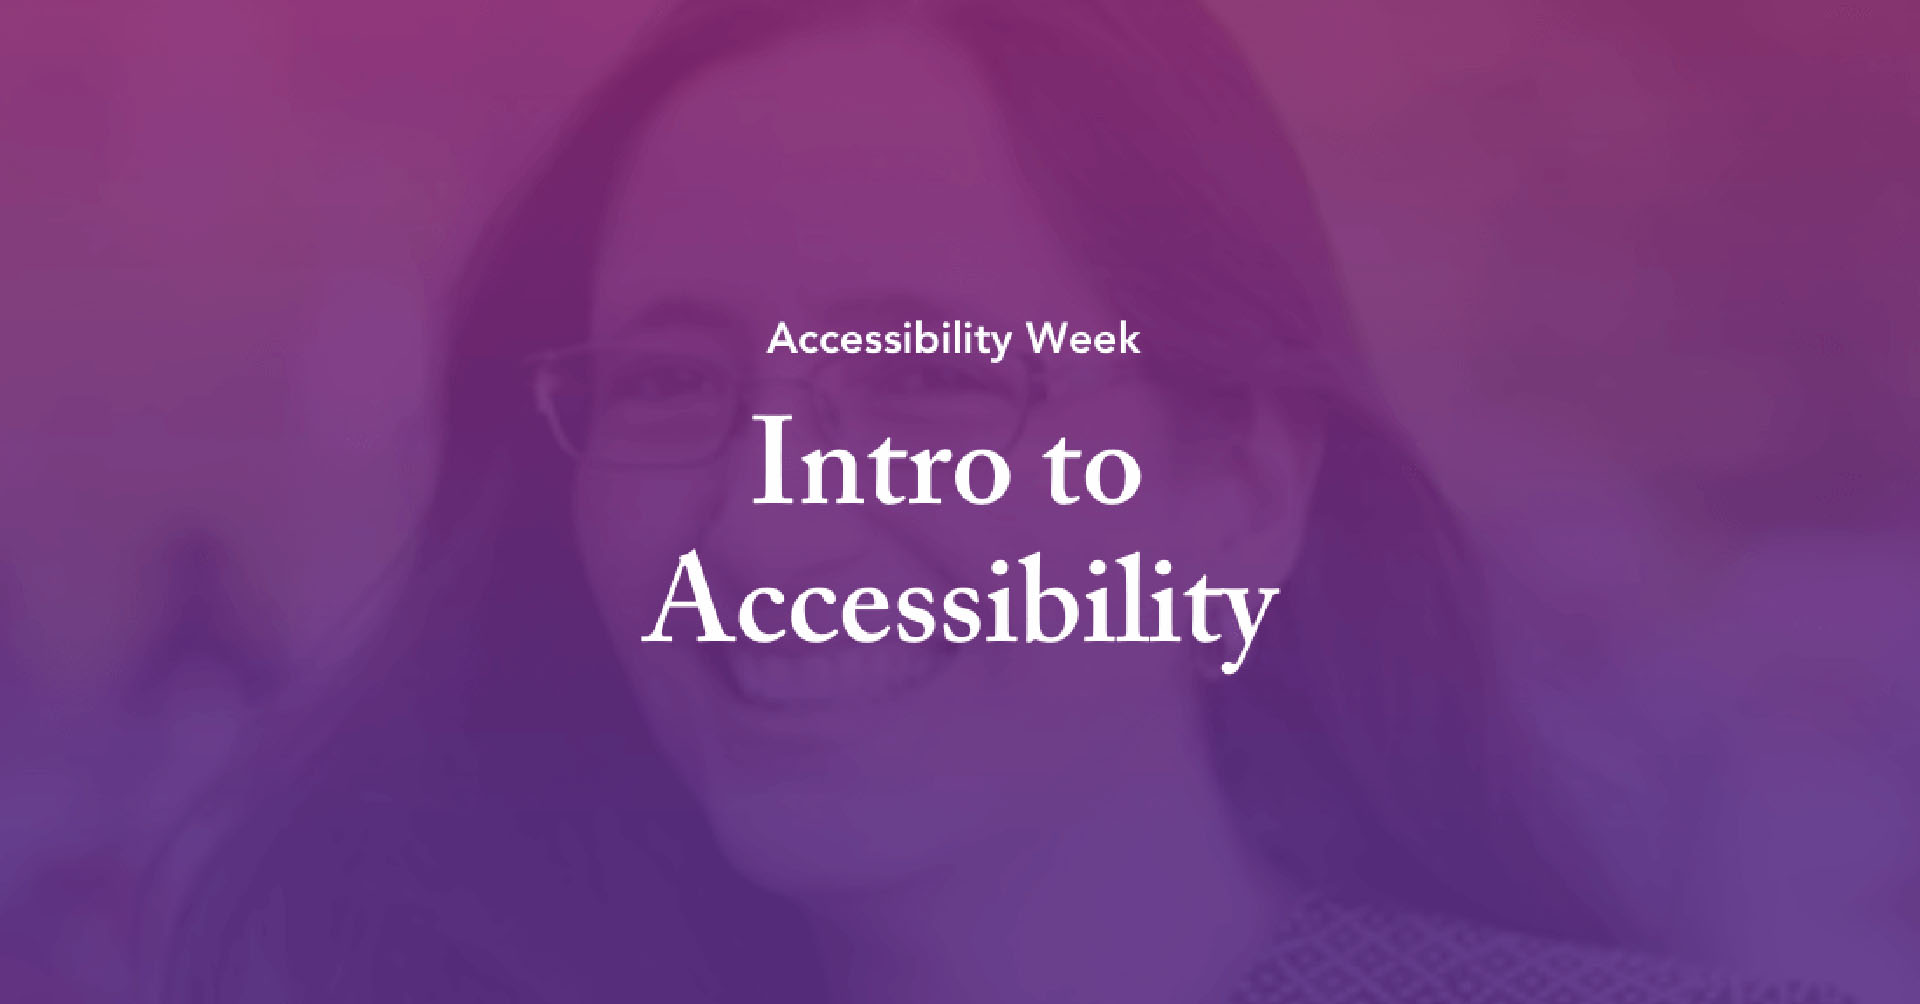 Accessibility Week - Intro to Accessibility